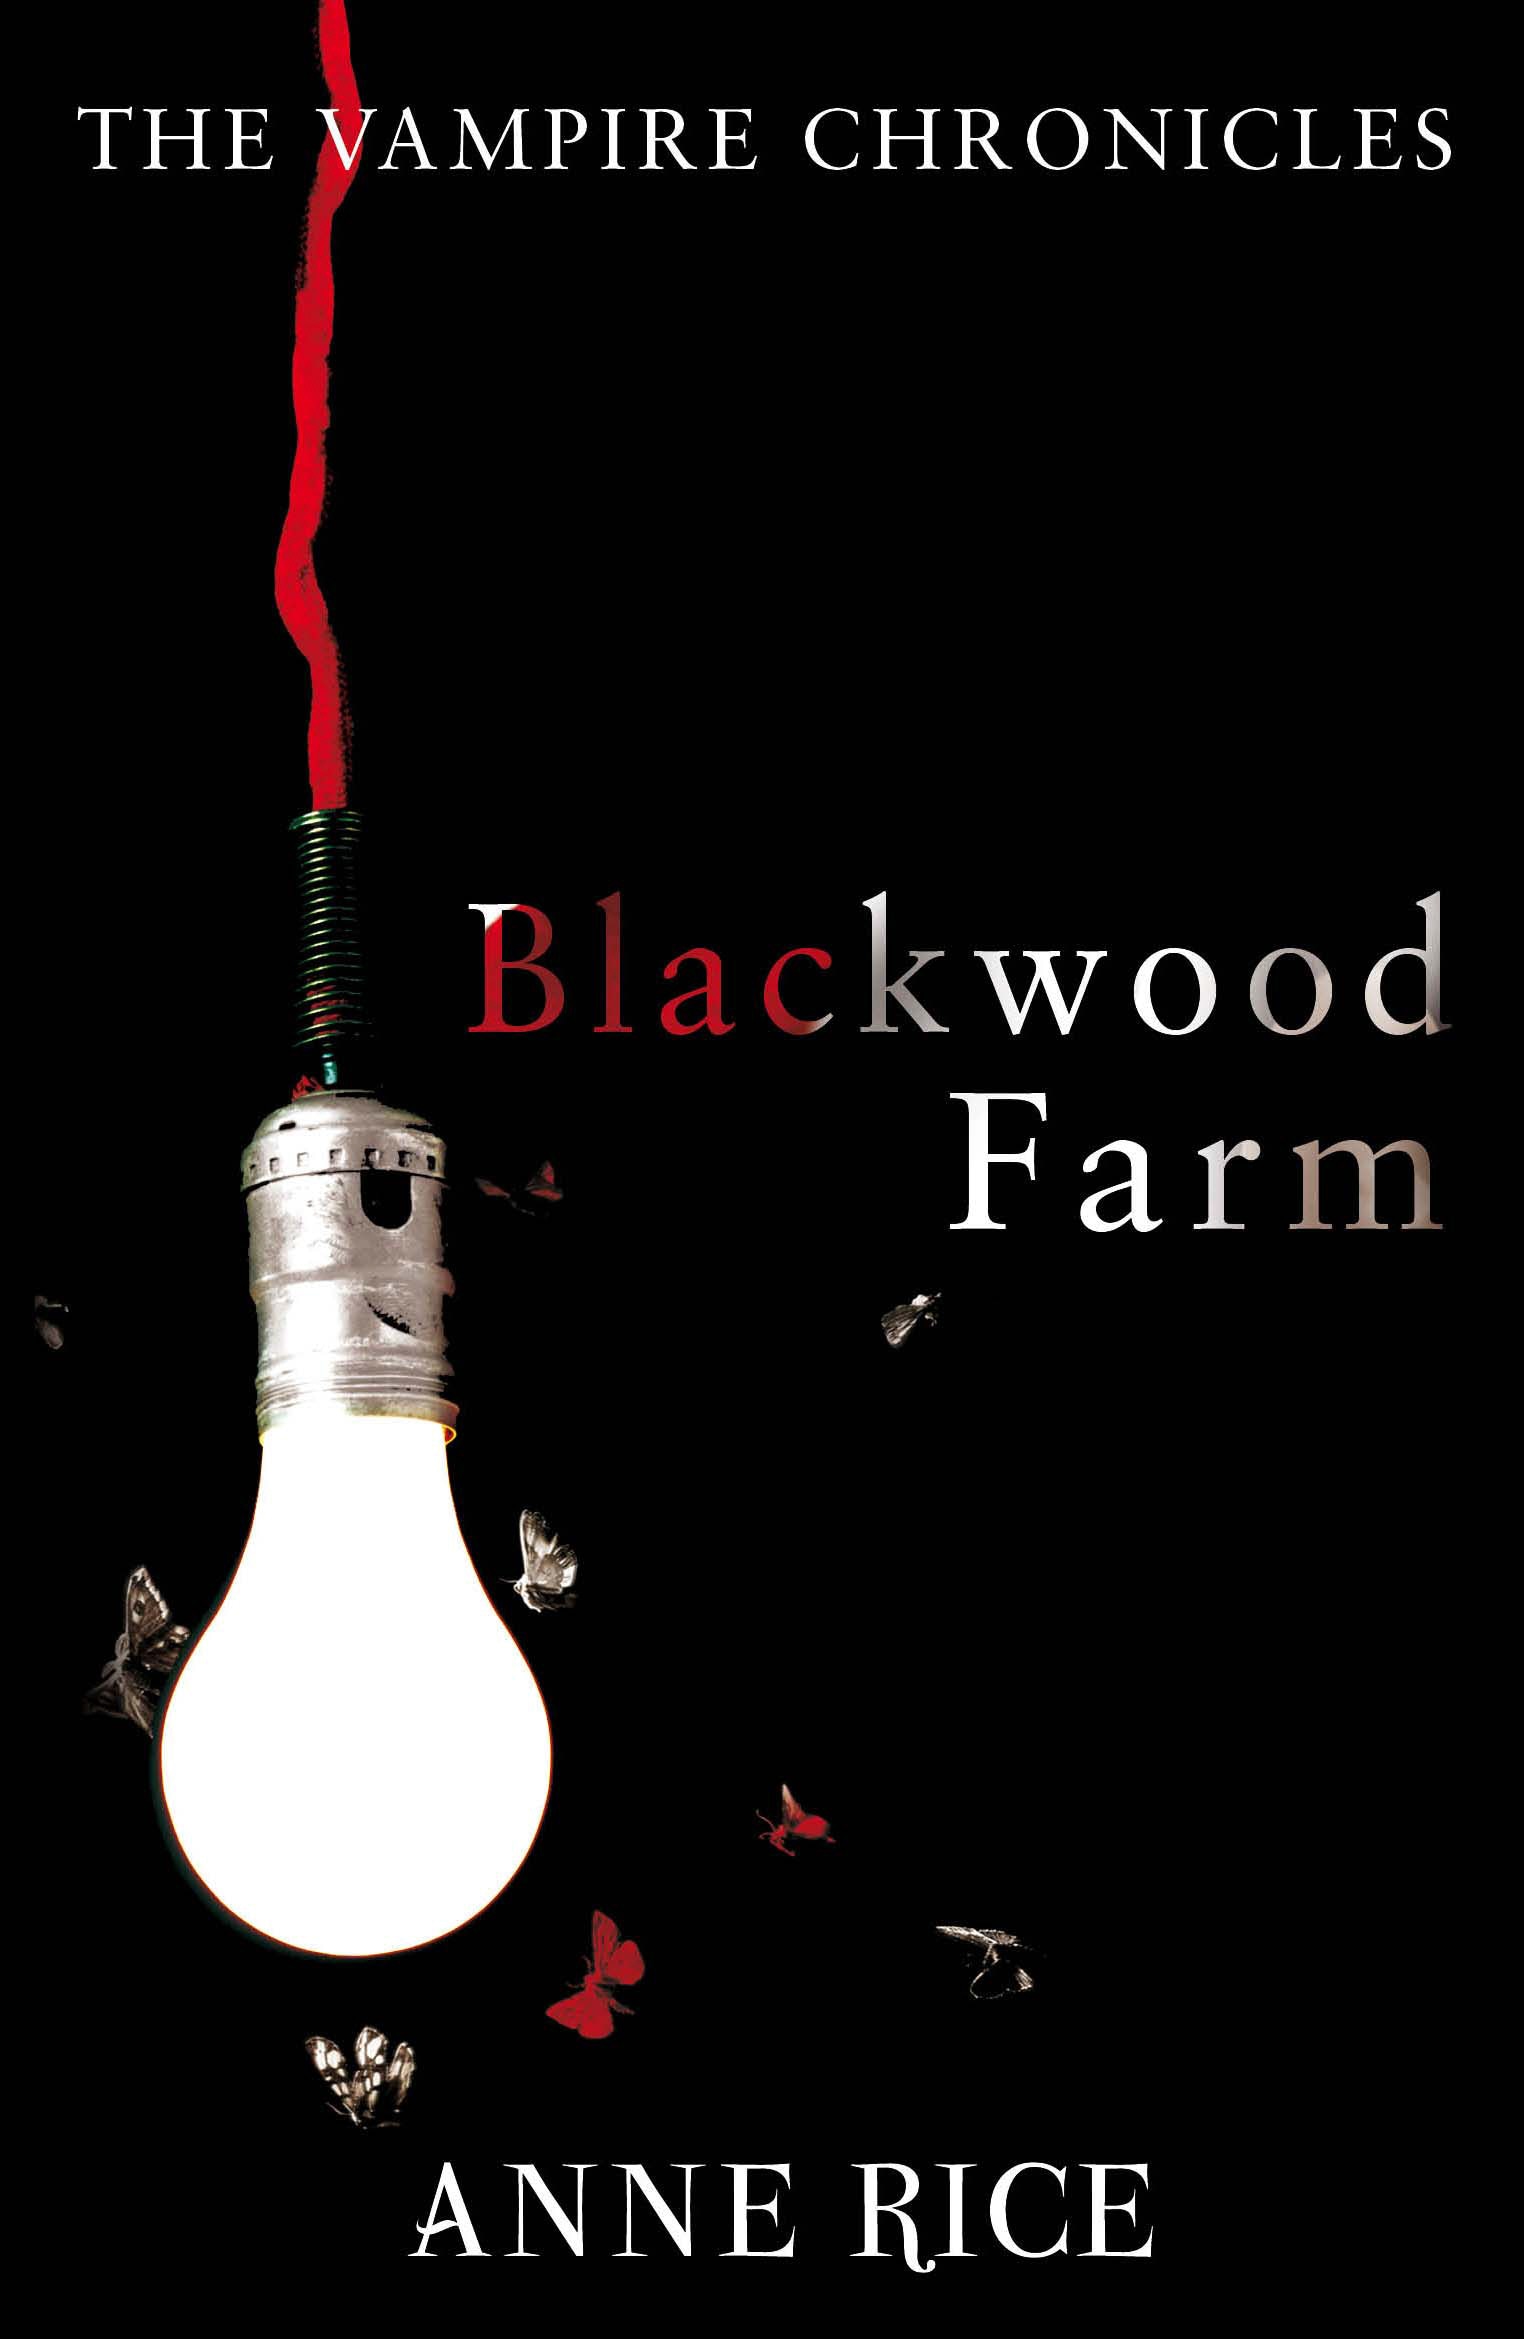 Book “Blackwood Farm” by Anne Rice — March 4, 2010